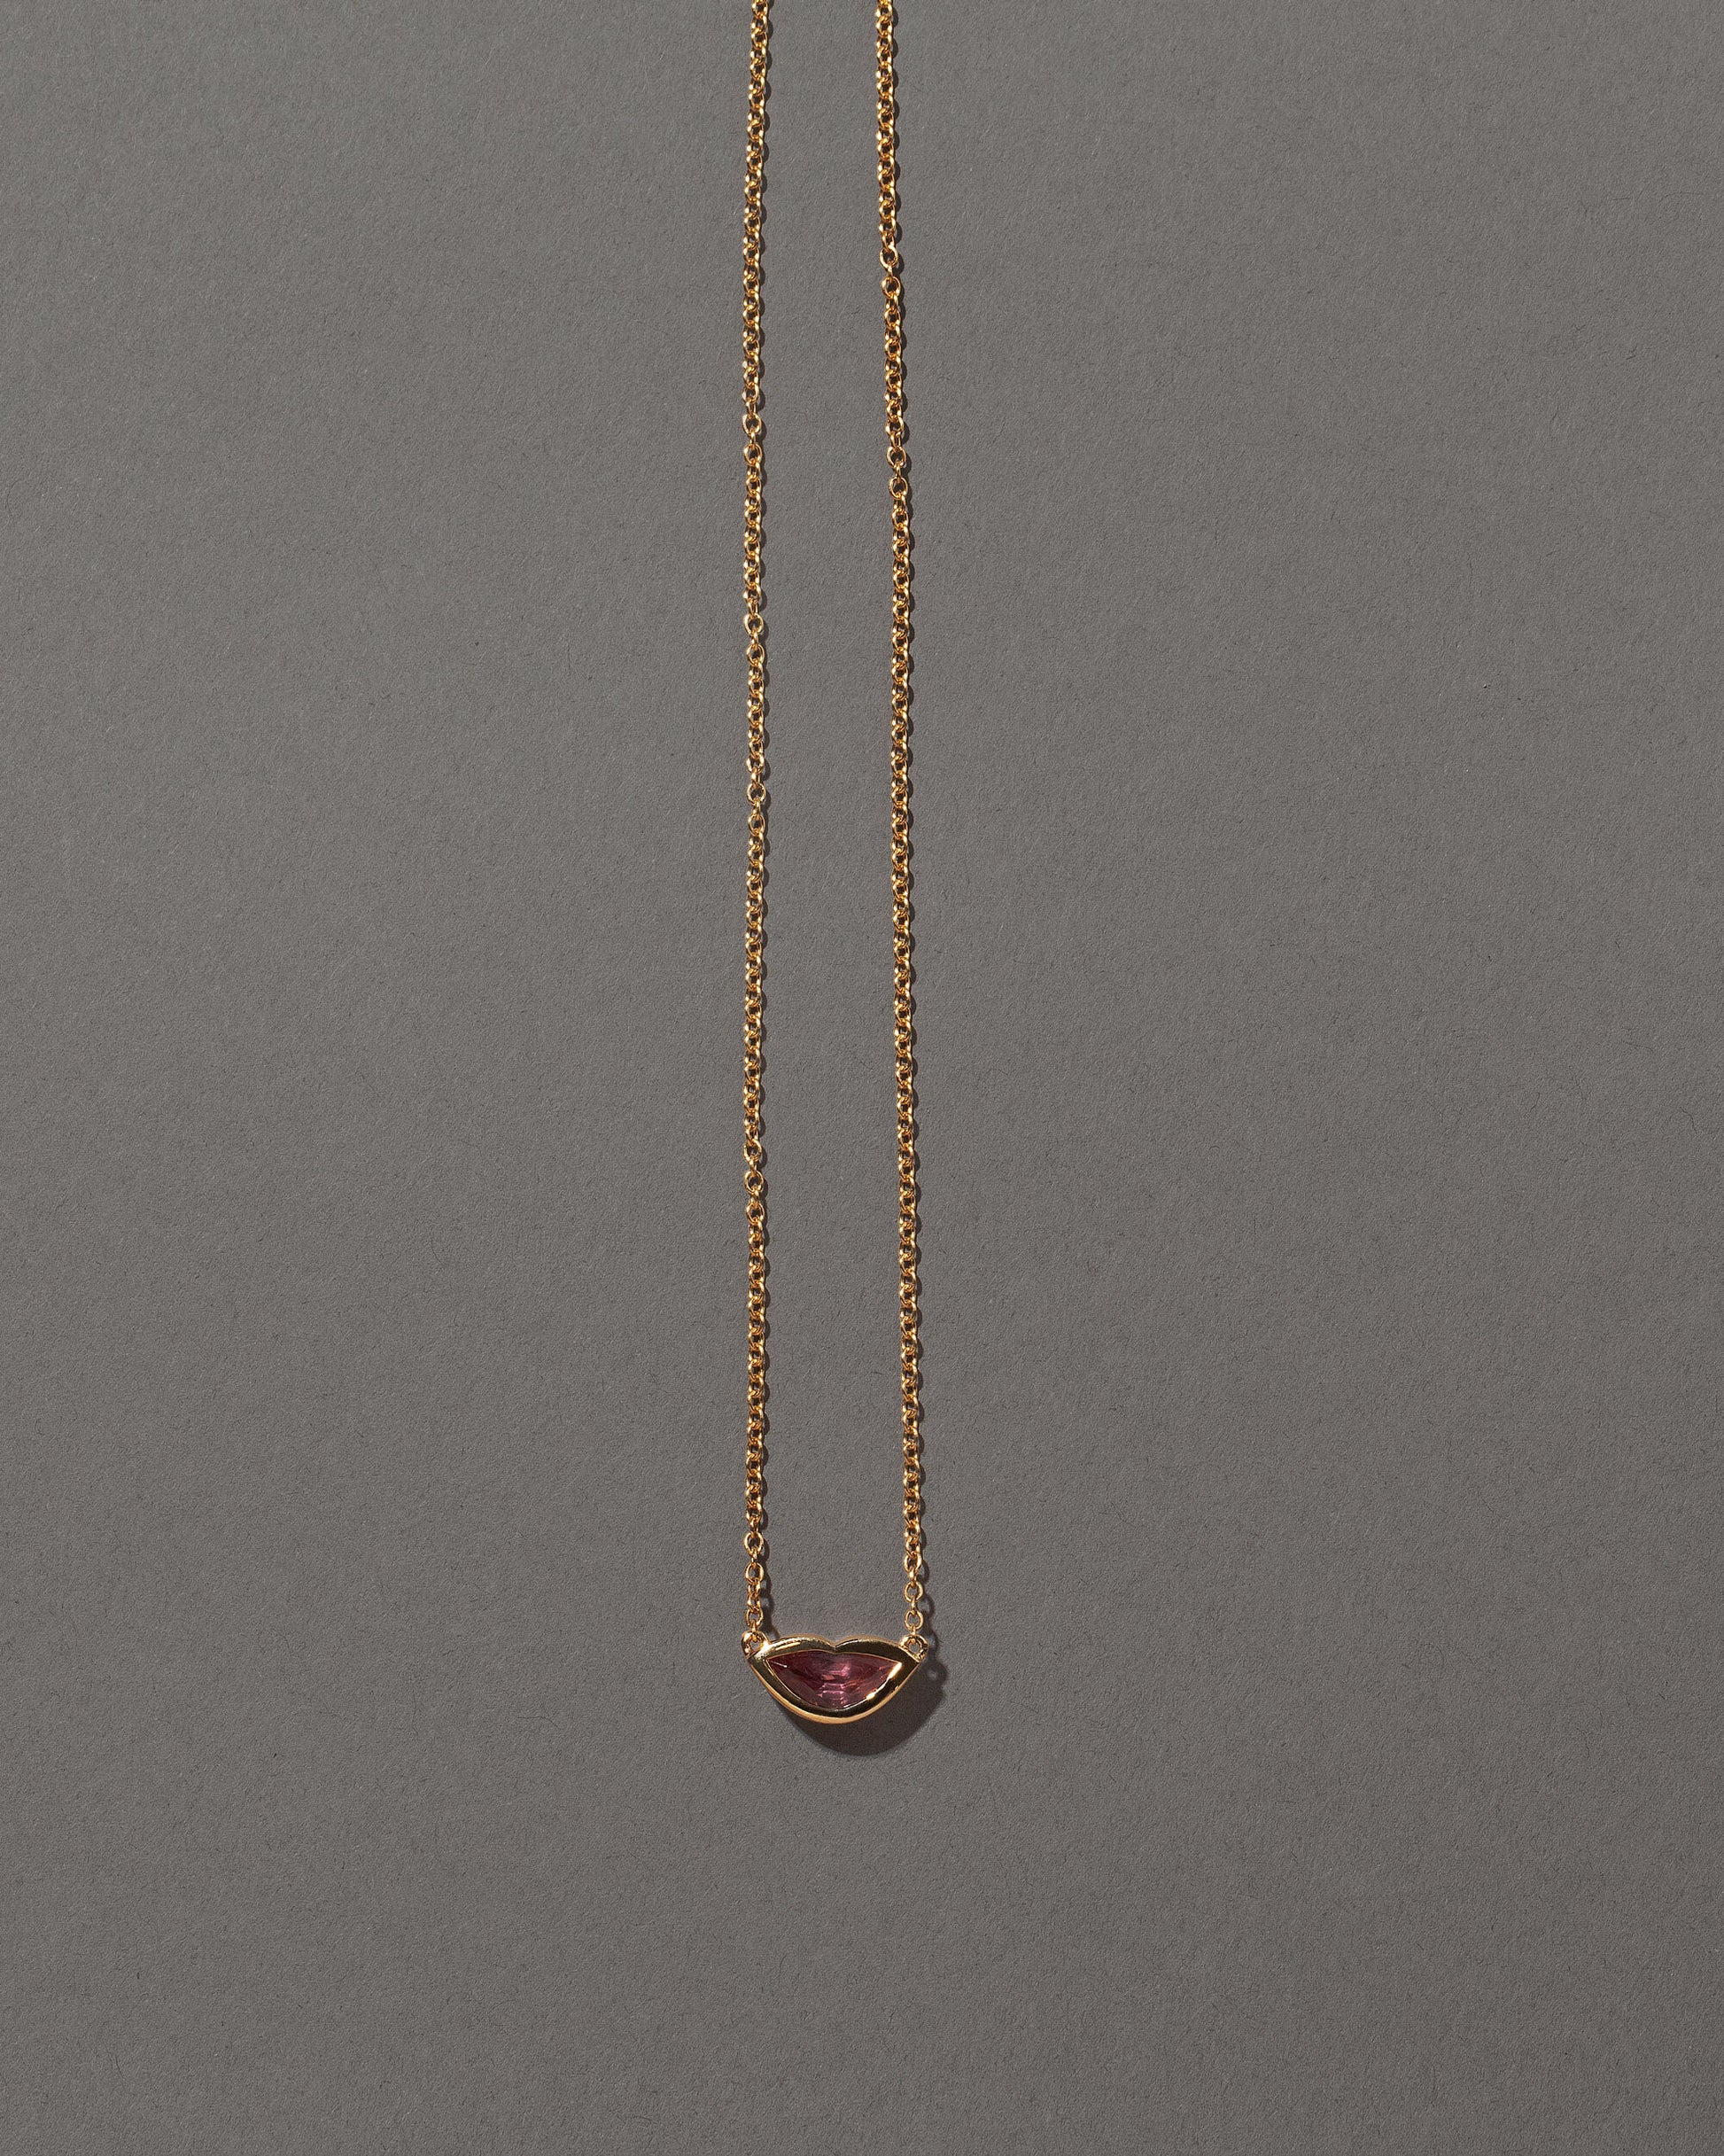 Peach Spinel Lover's Kiss Necklace on grey color background.